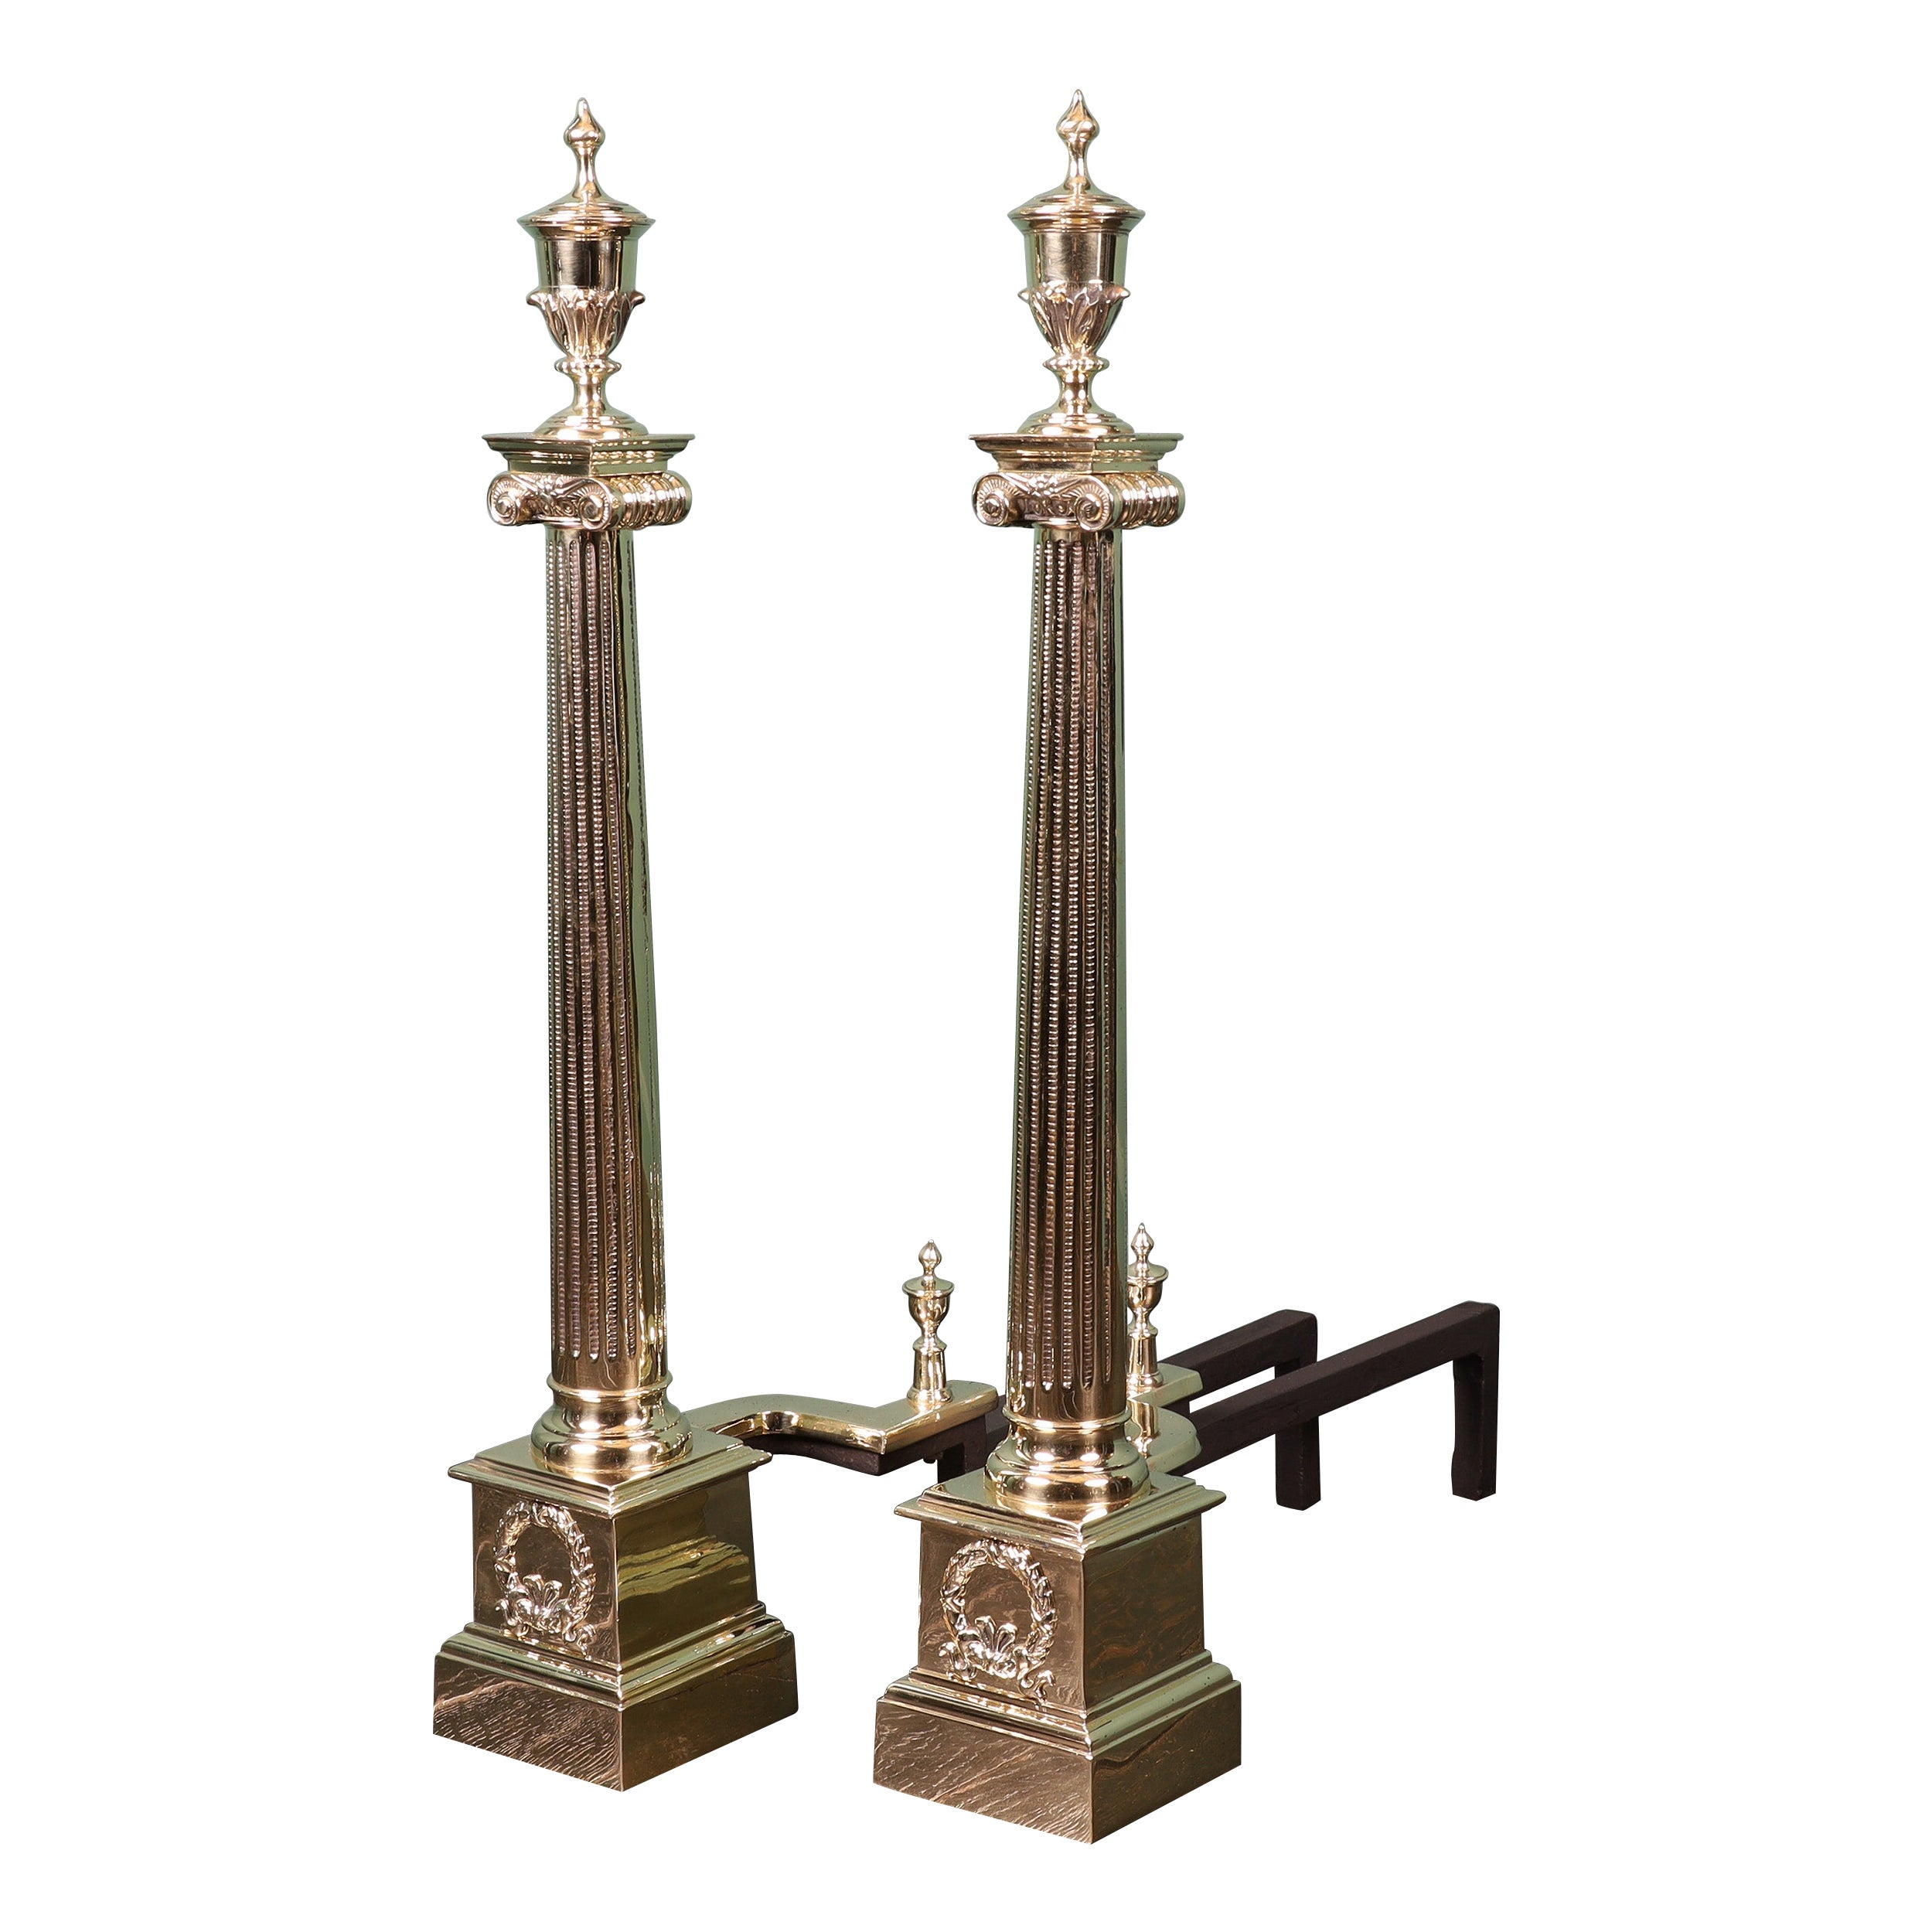 A Pair of 19th Century Neo-Classical Brass Andirons For Sale